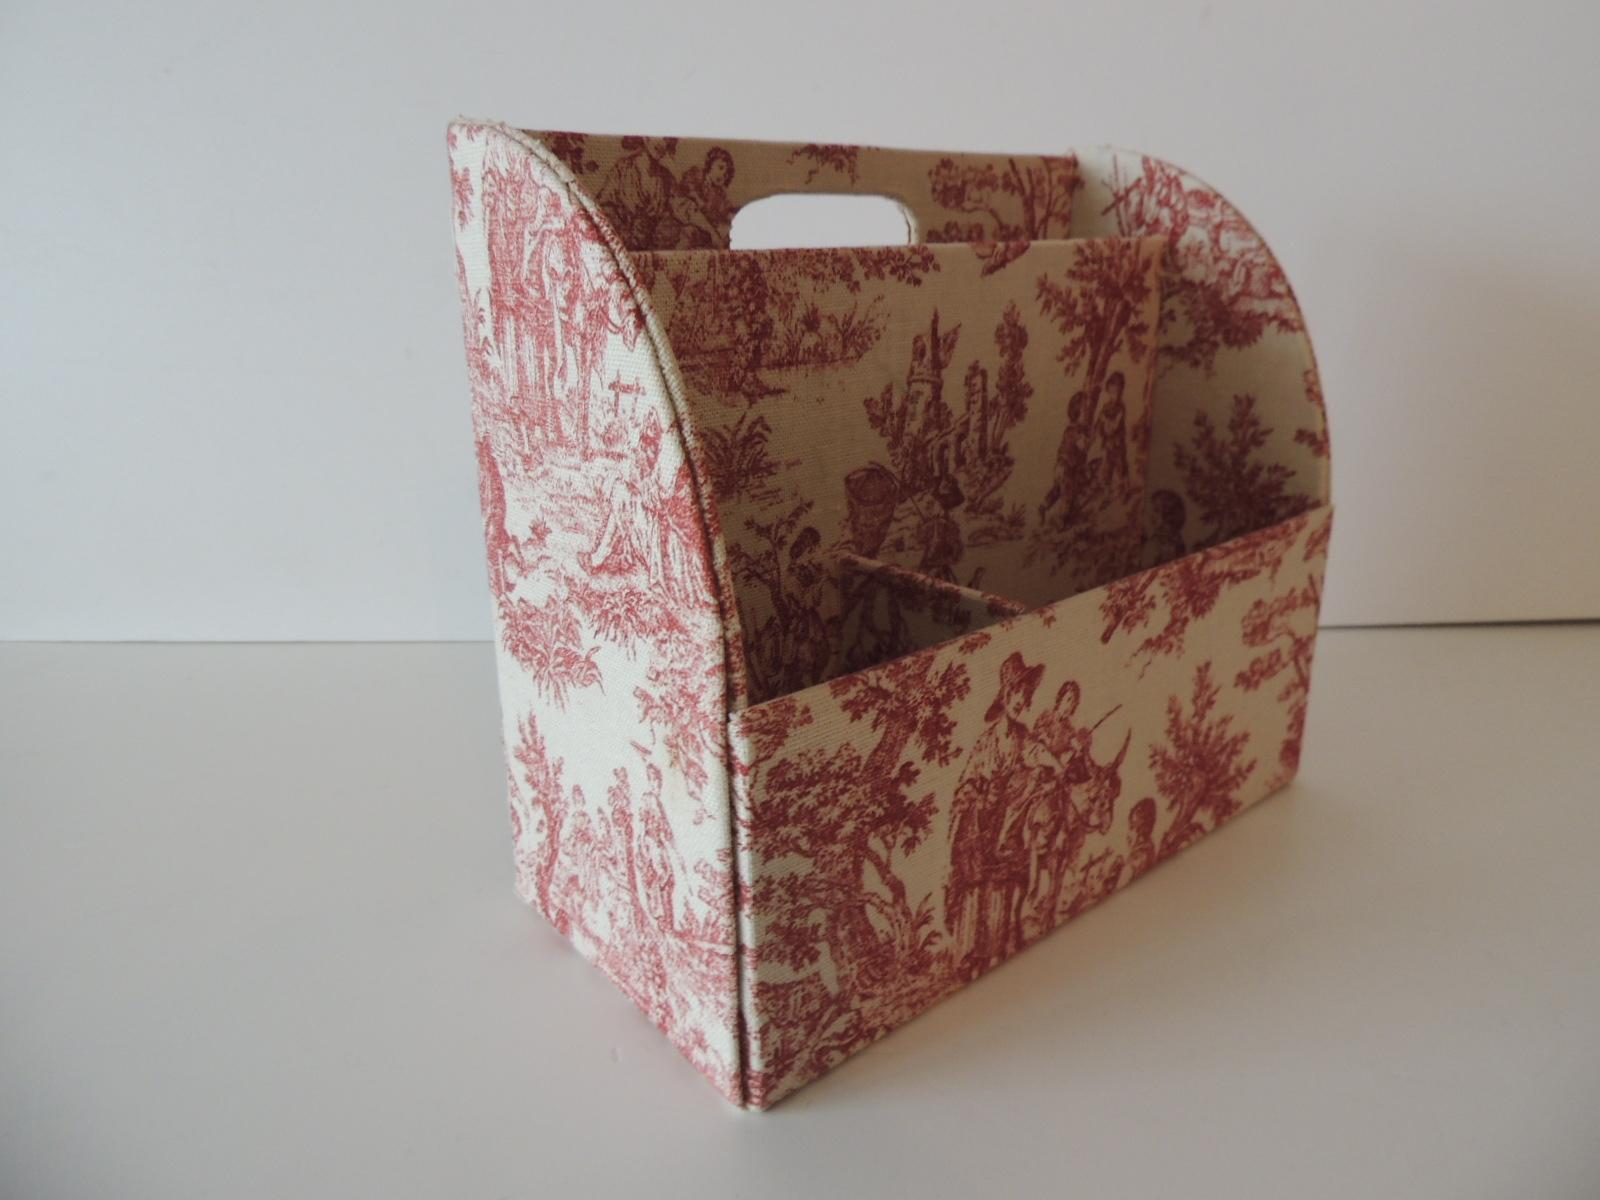 Red and tan toile desk stationary caddy.
Size: 9.5